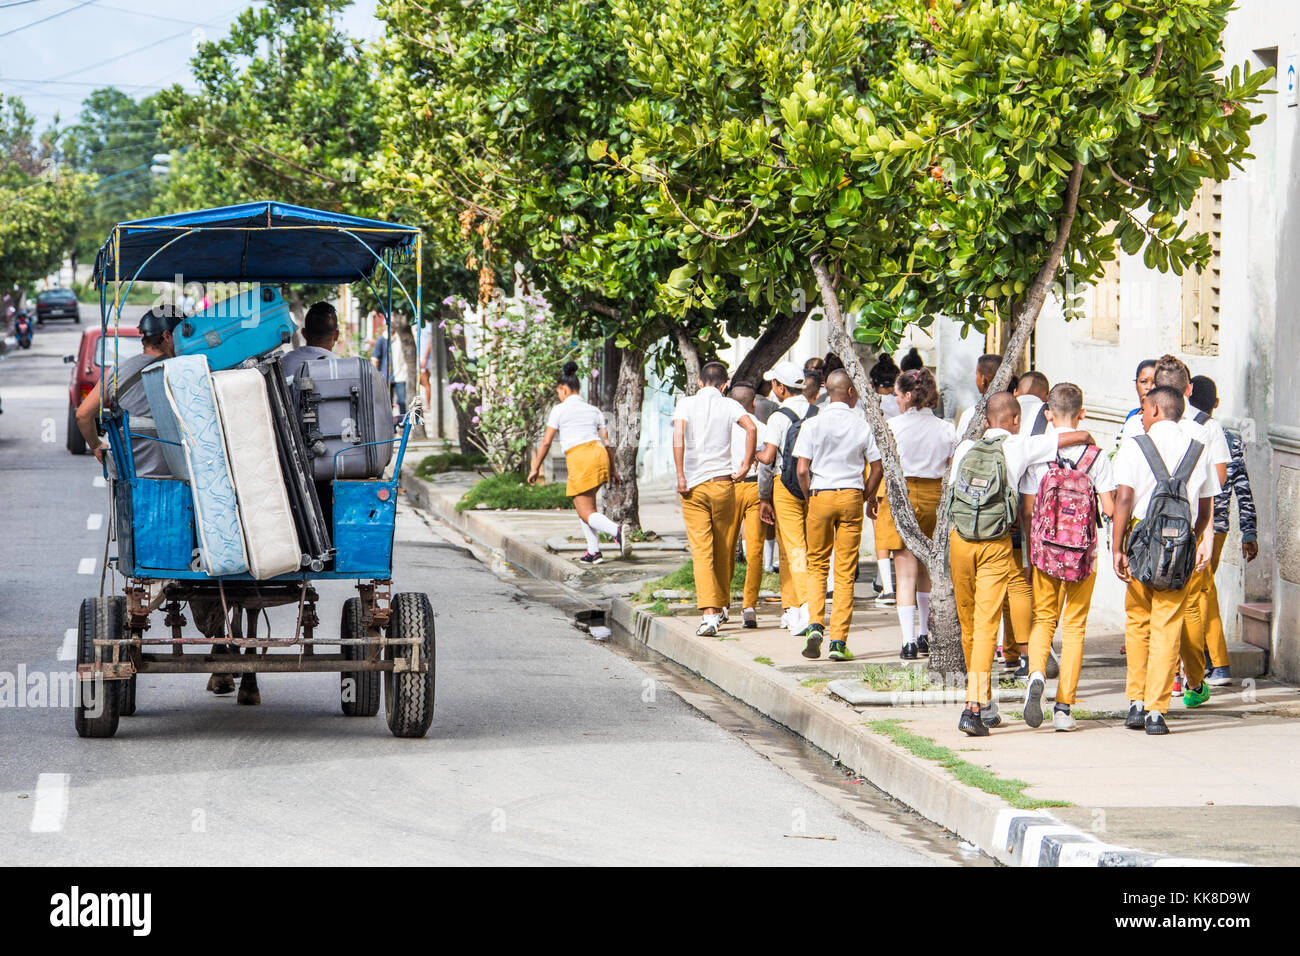 Students walking to school berside a horse carriage moving possessions, Cienfuegos, Cuba Stock Photo